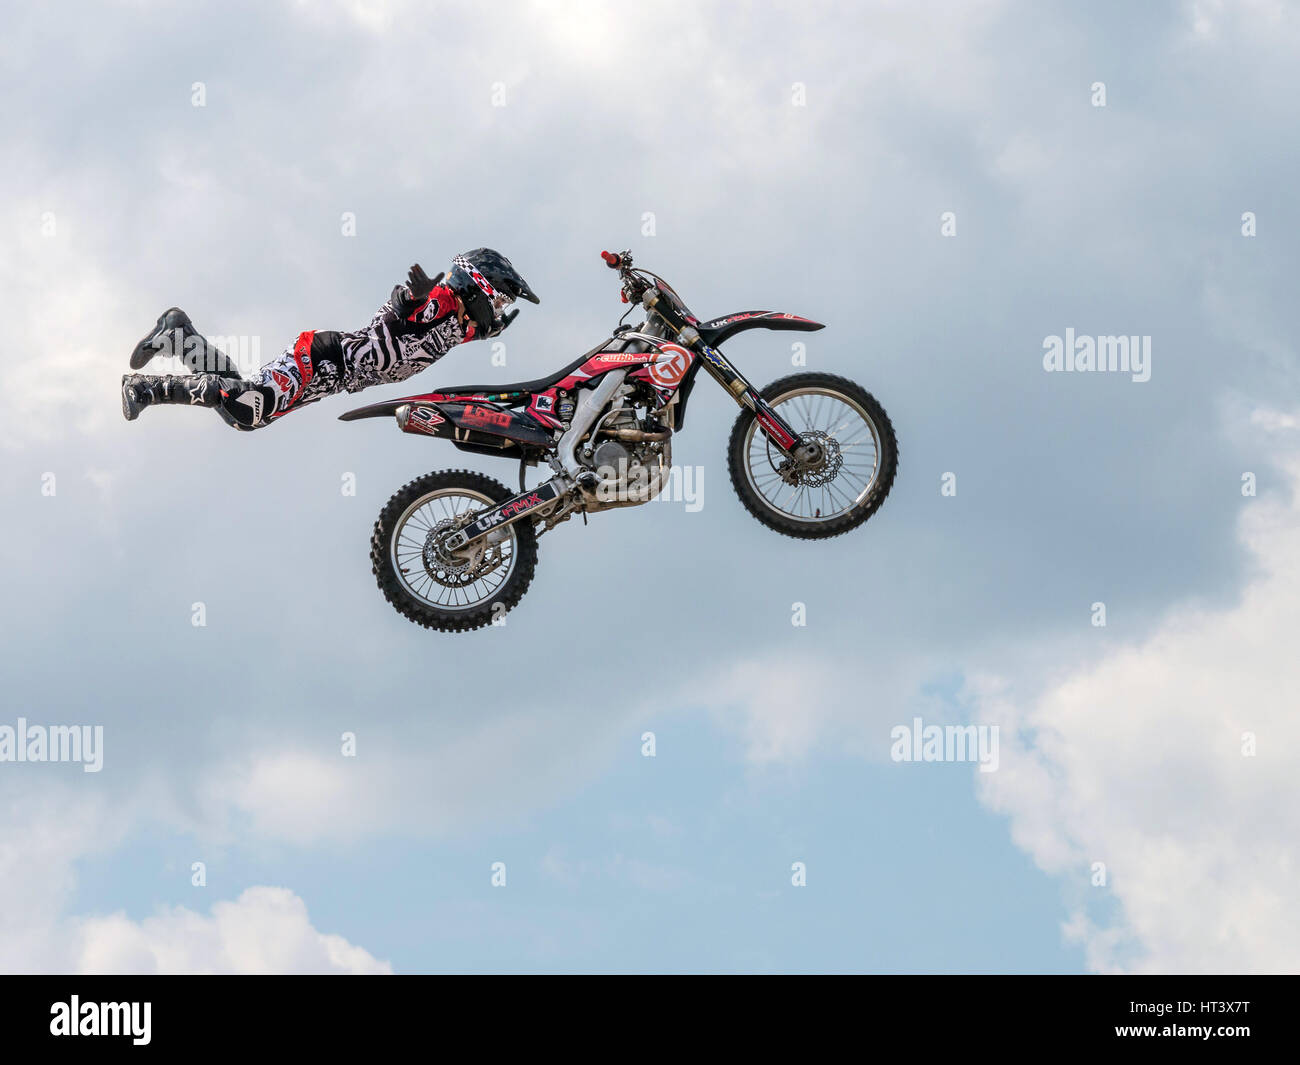 Freestyle Motocross Stock Photos - 10,109 Images